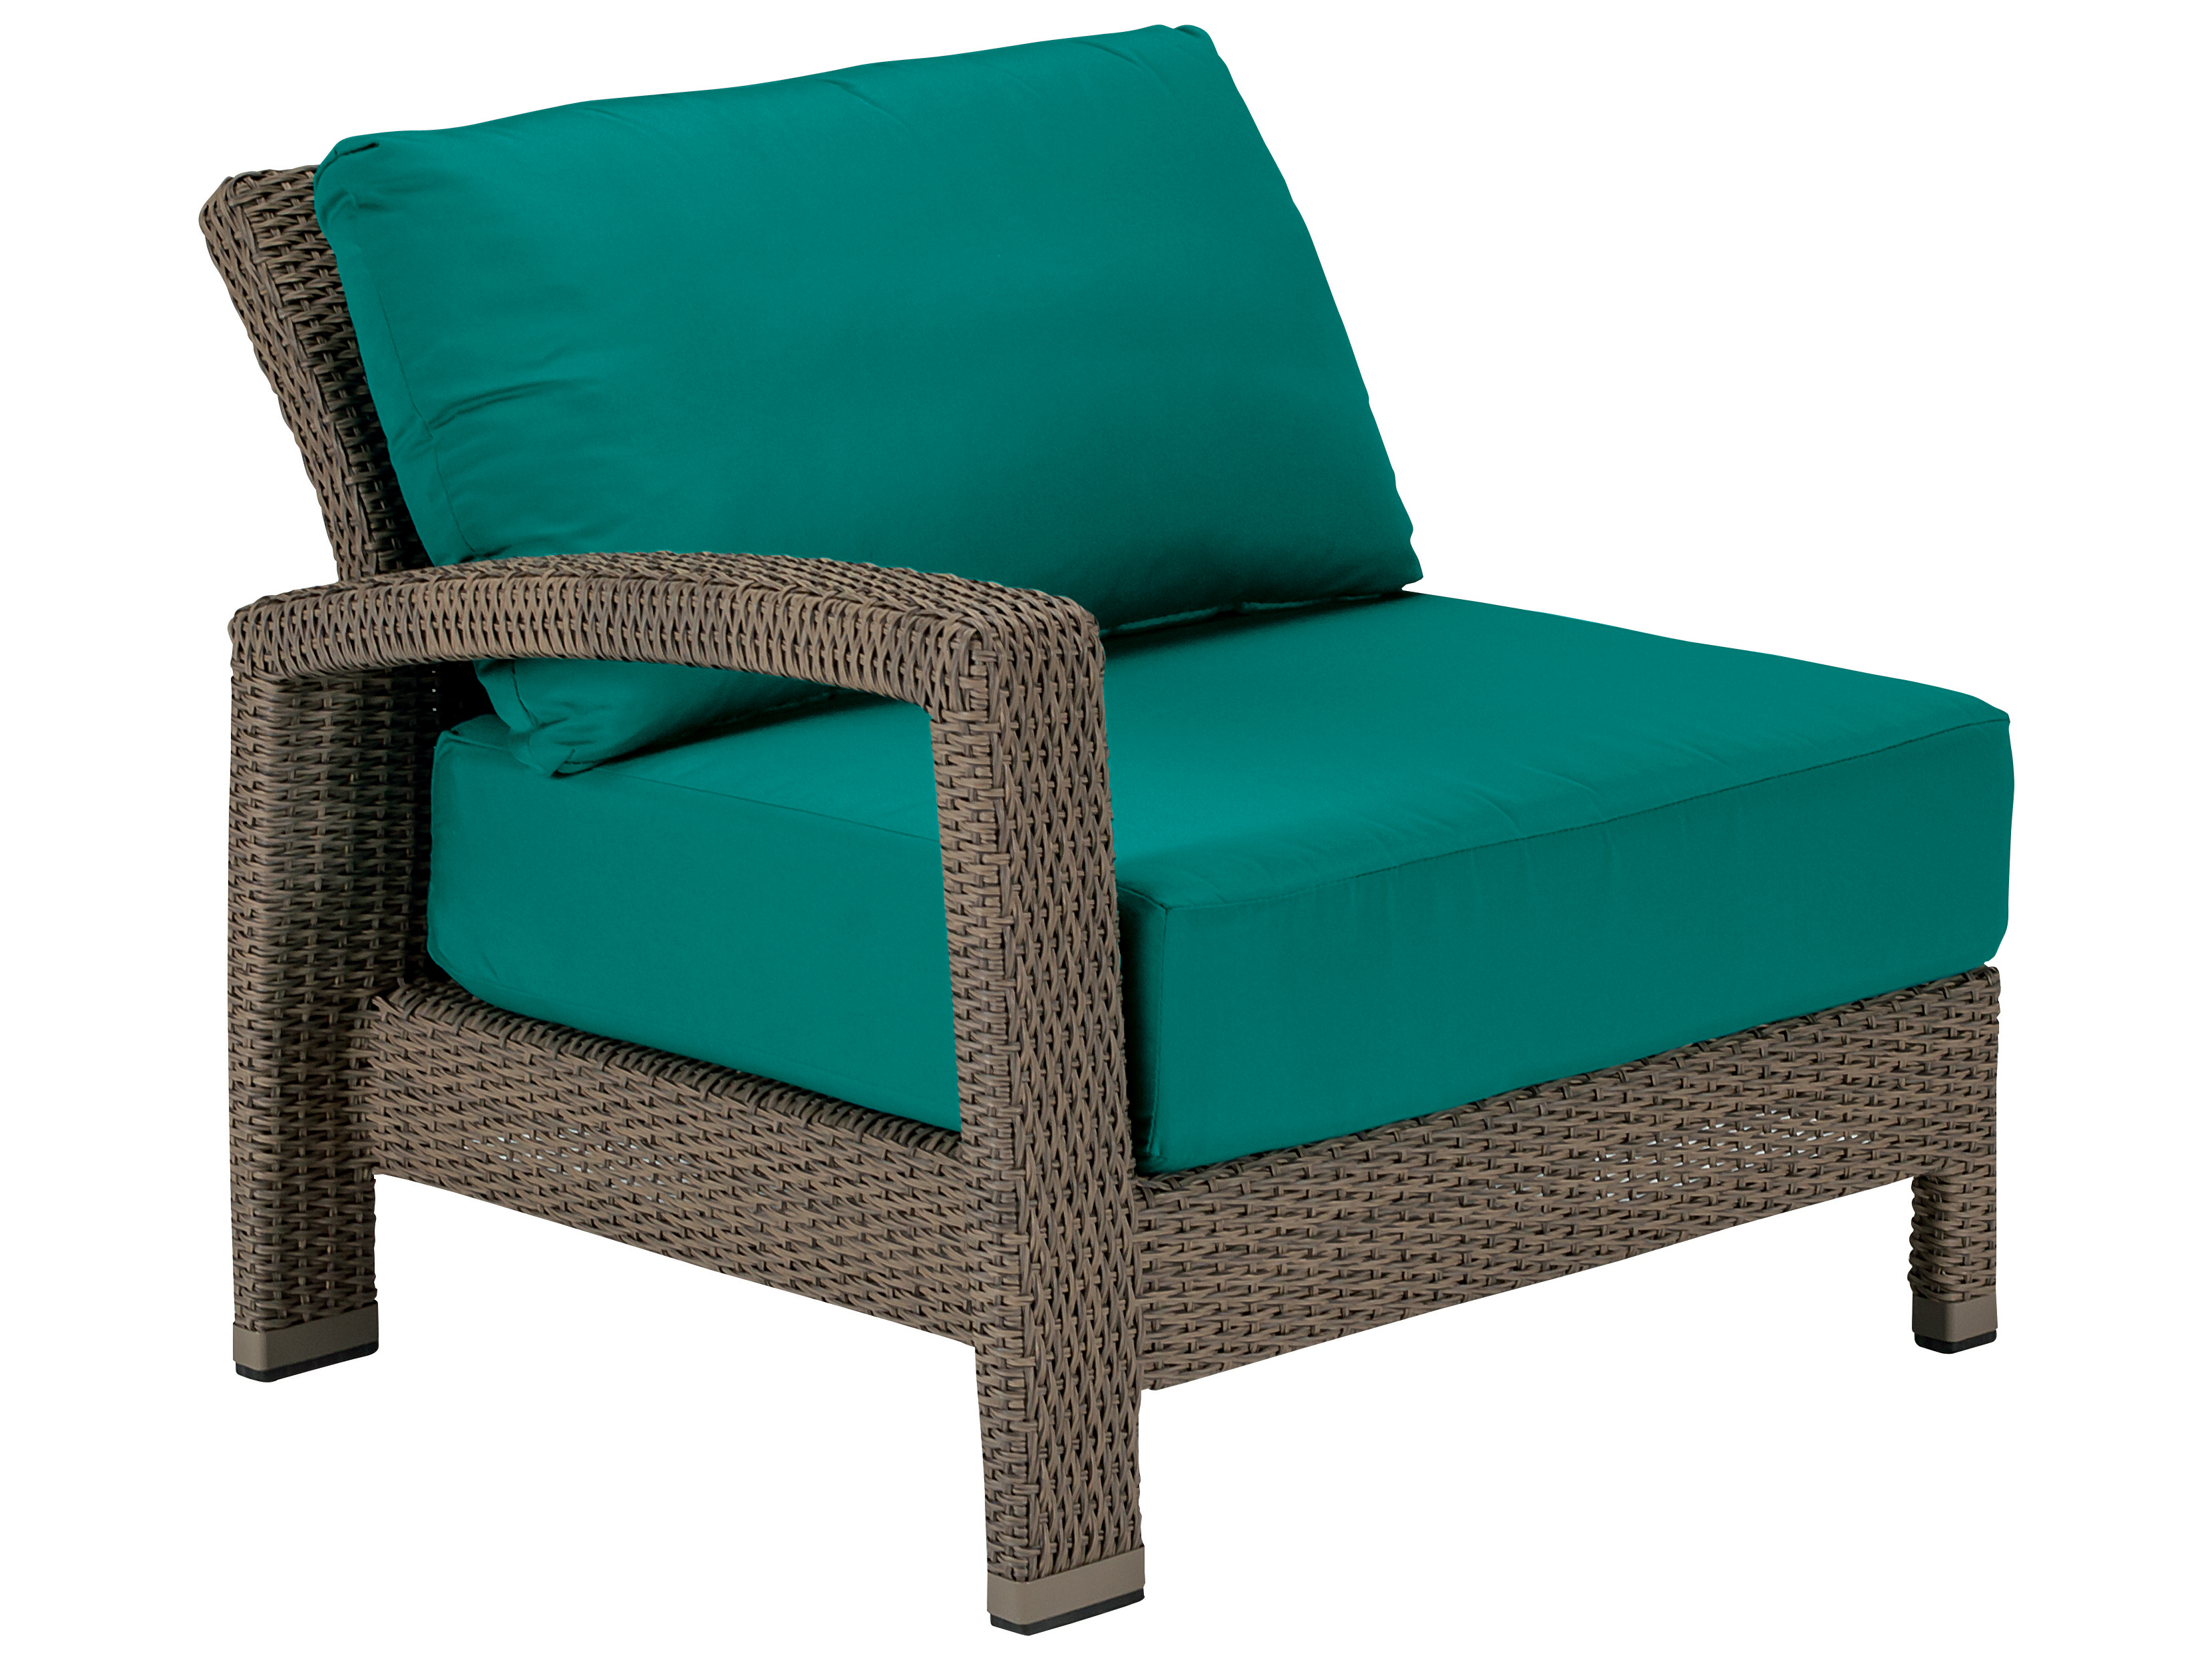 Tropitone Evo Woven Right Arm Lounge Chair Replacement Cushions ...